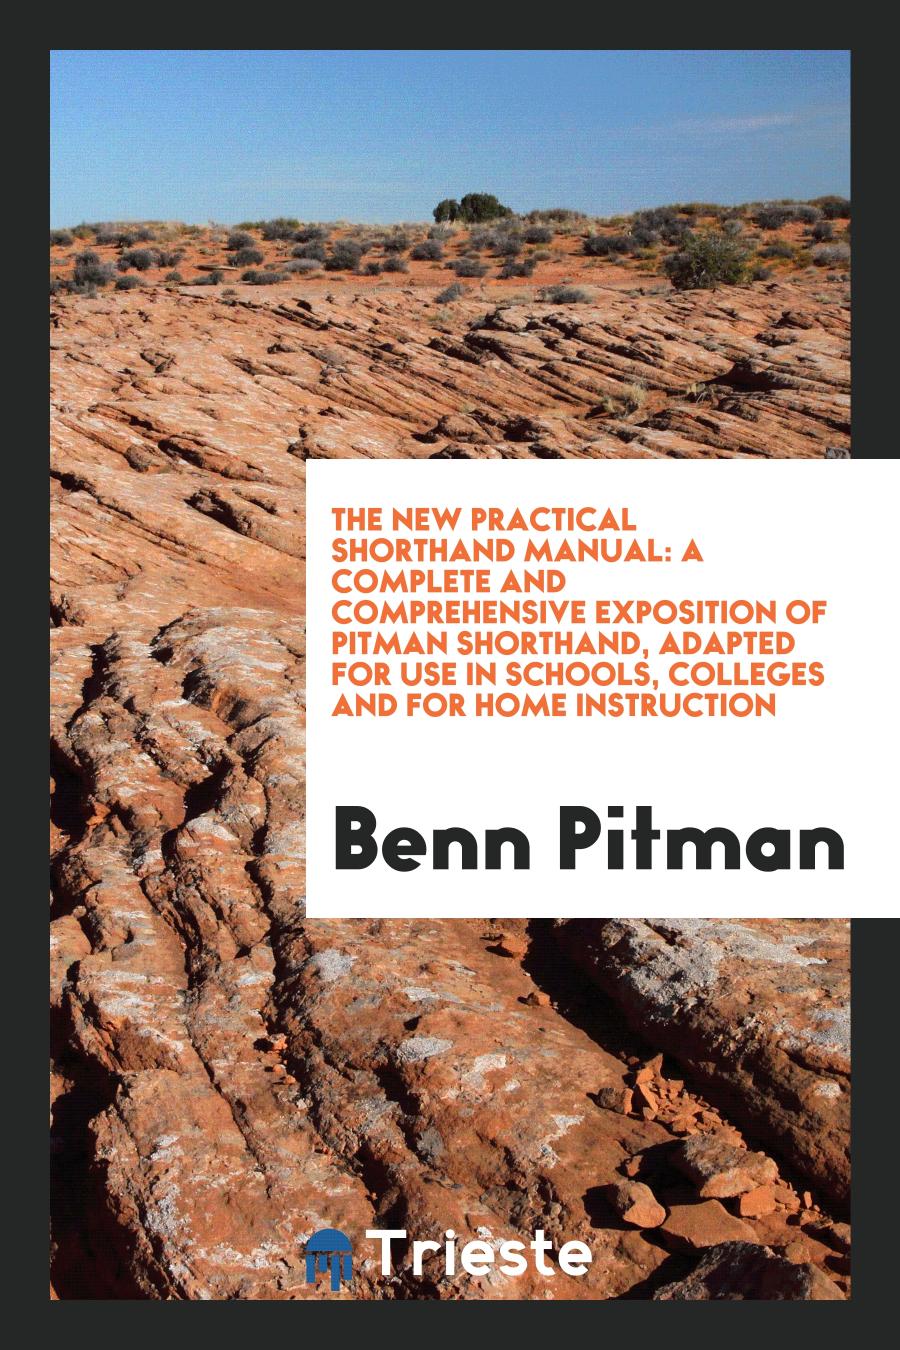 The New Practical Shorthand Manual: A Complete and Comprehensive Exposition of Pitman Shorthand, Adapted for Use in Schools, Colleges and for Home Instruction